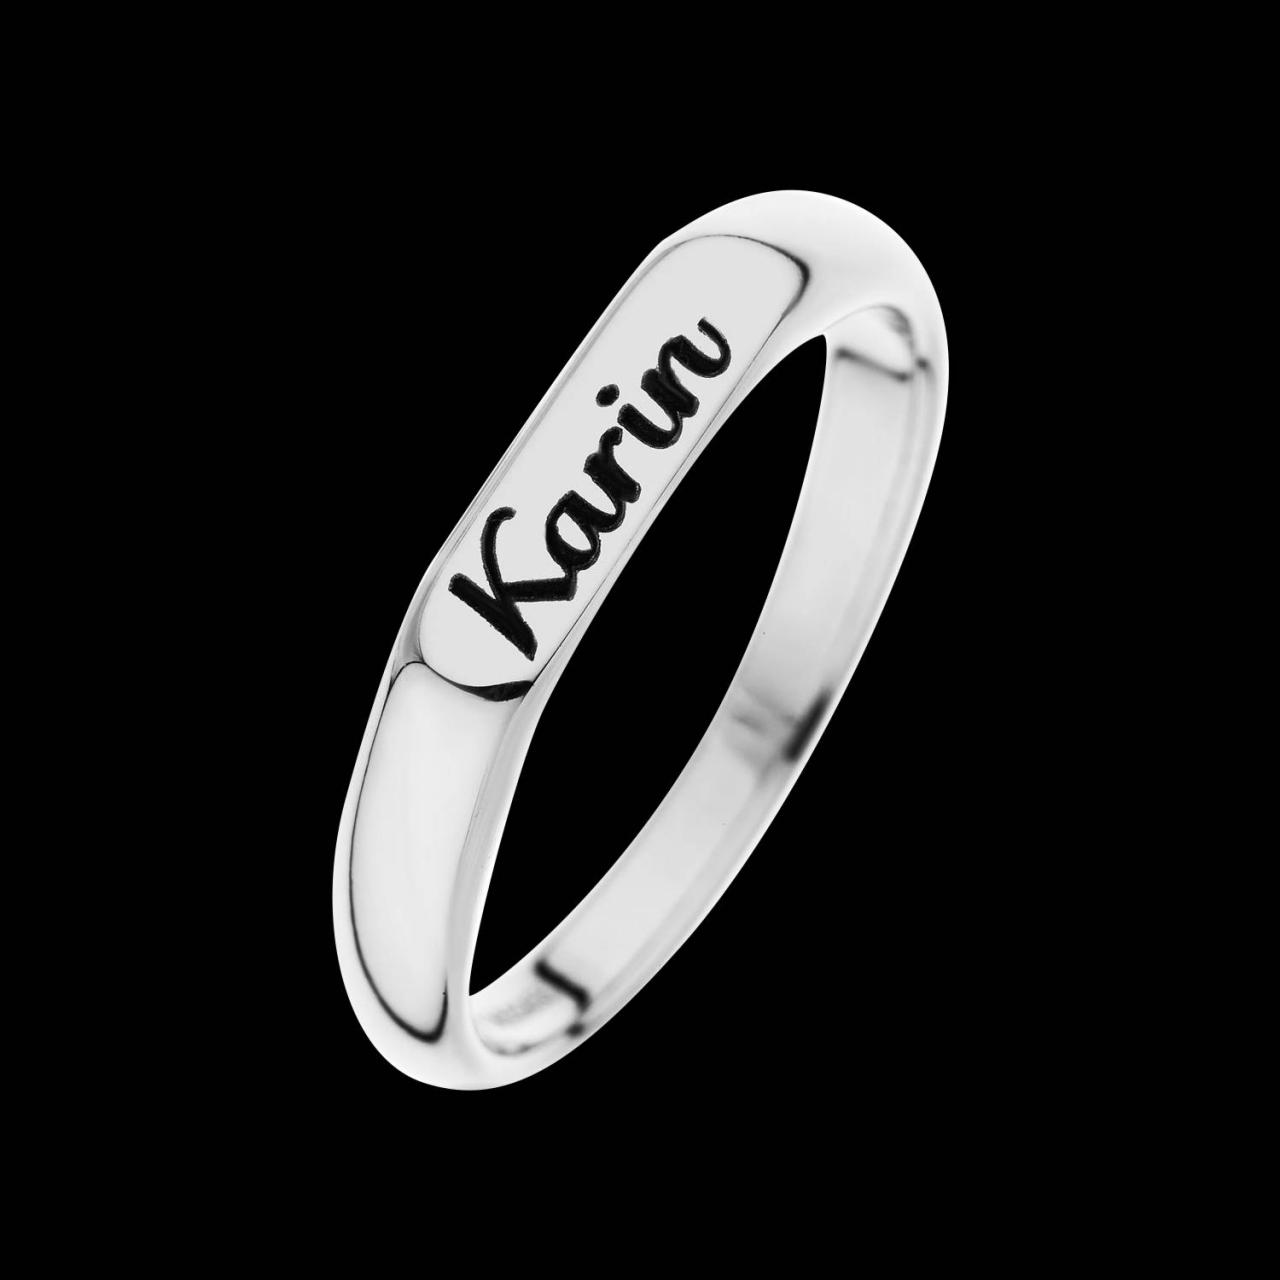 Personalized Ring - Custom Ring - Engraved Ring - Personalized Jewelry - Personalized Gift - Personalized Name Ring - Sterling Silver Name Ring -